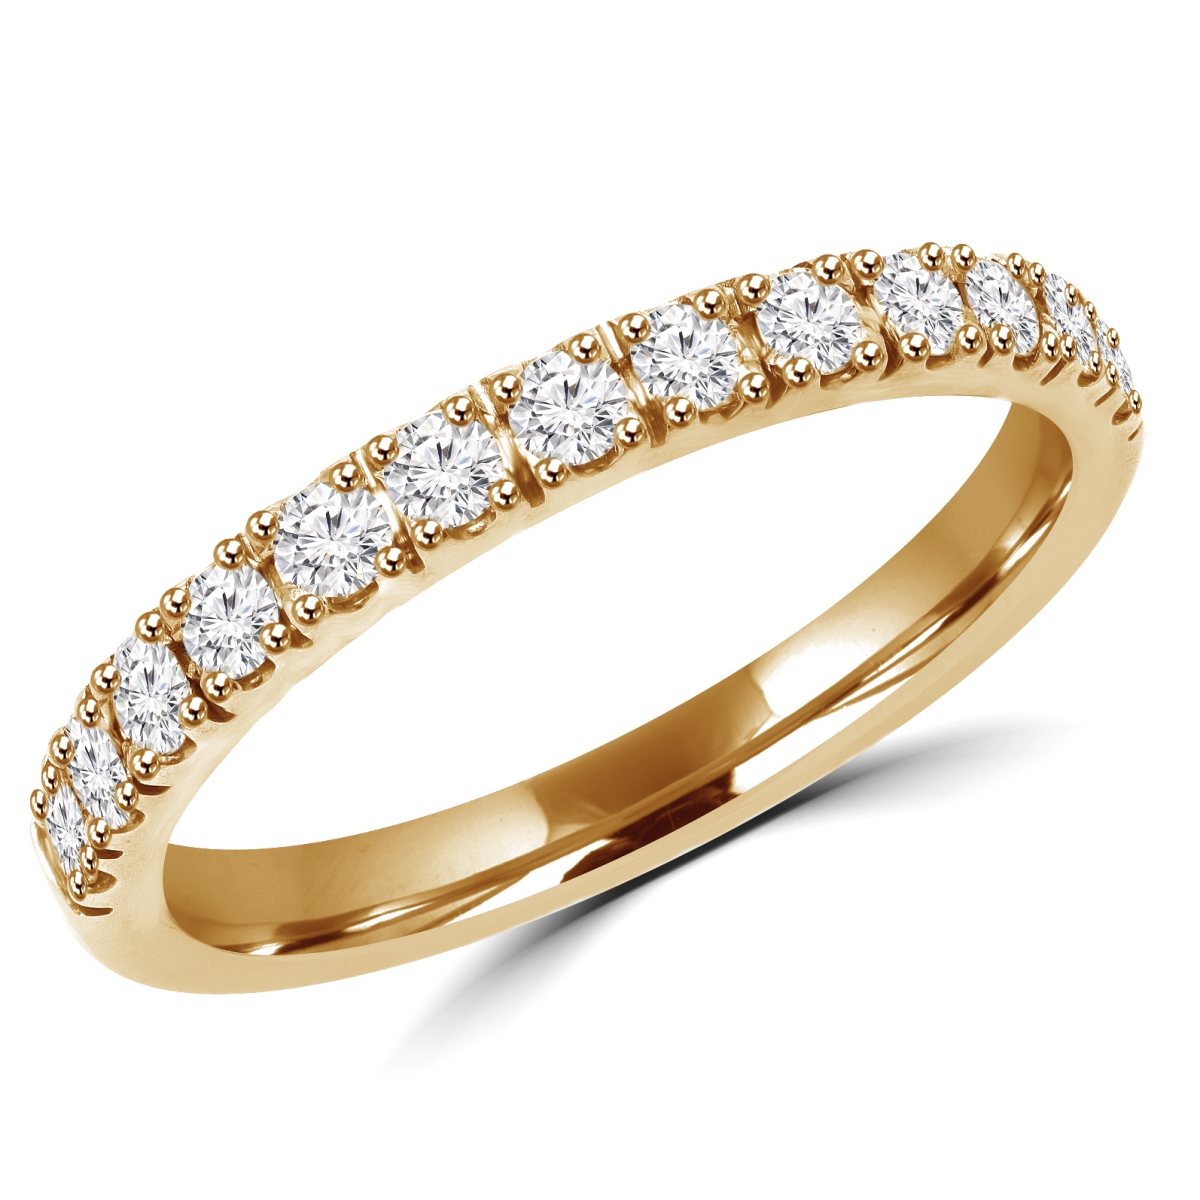 Picture of Majesty Diamonds MD180187-4.75 0.3 CTW Round Diamond Semi-Eternity Wedding Band Ring in 14K Yellow Gold - Size 4.75